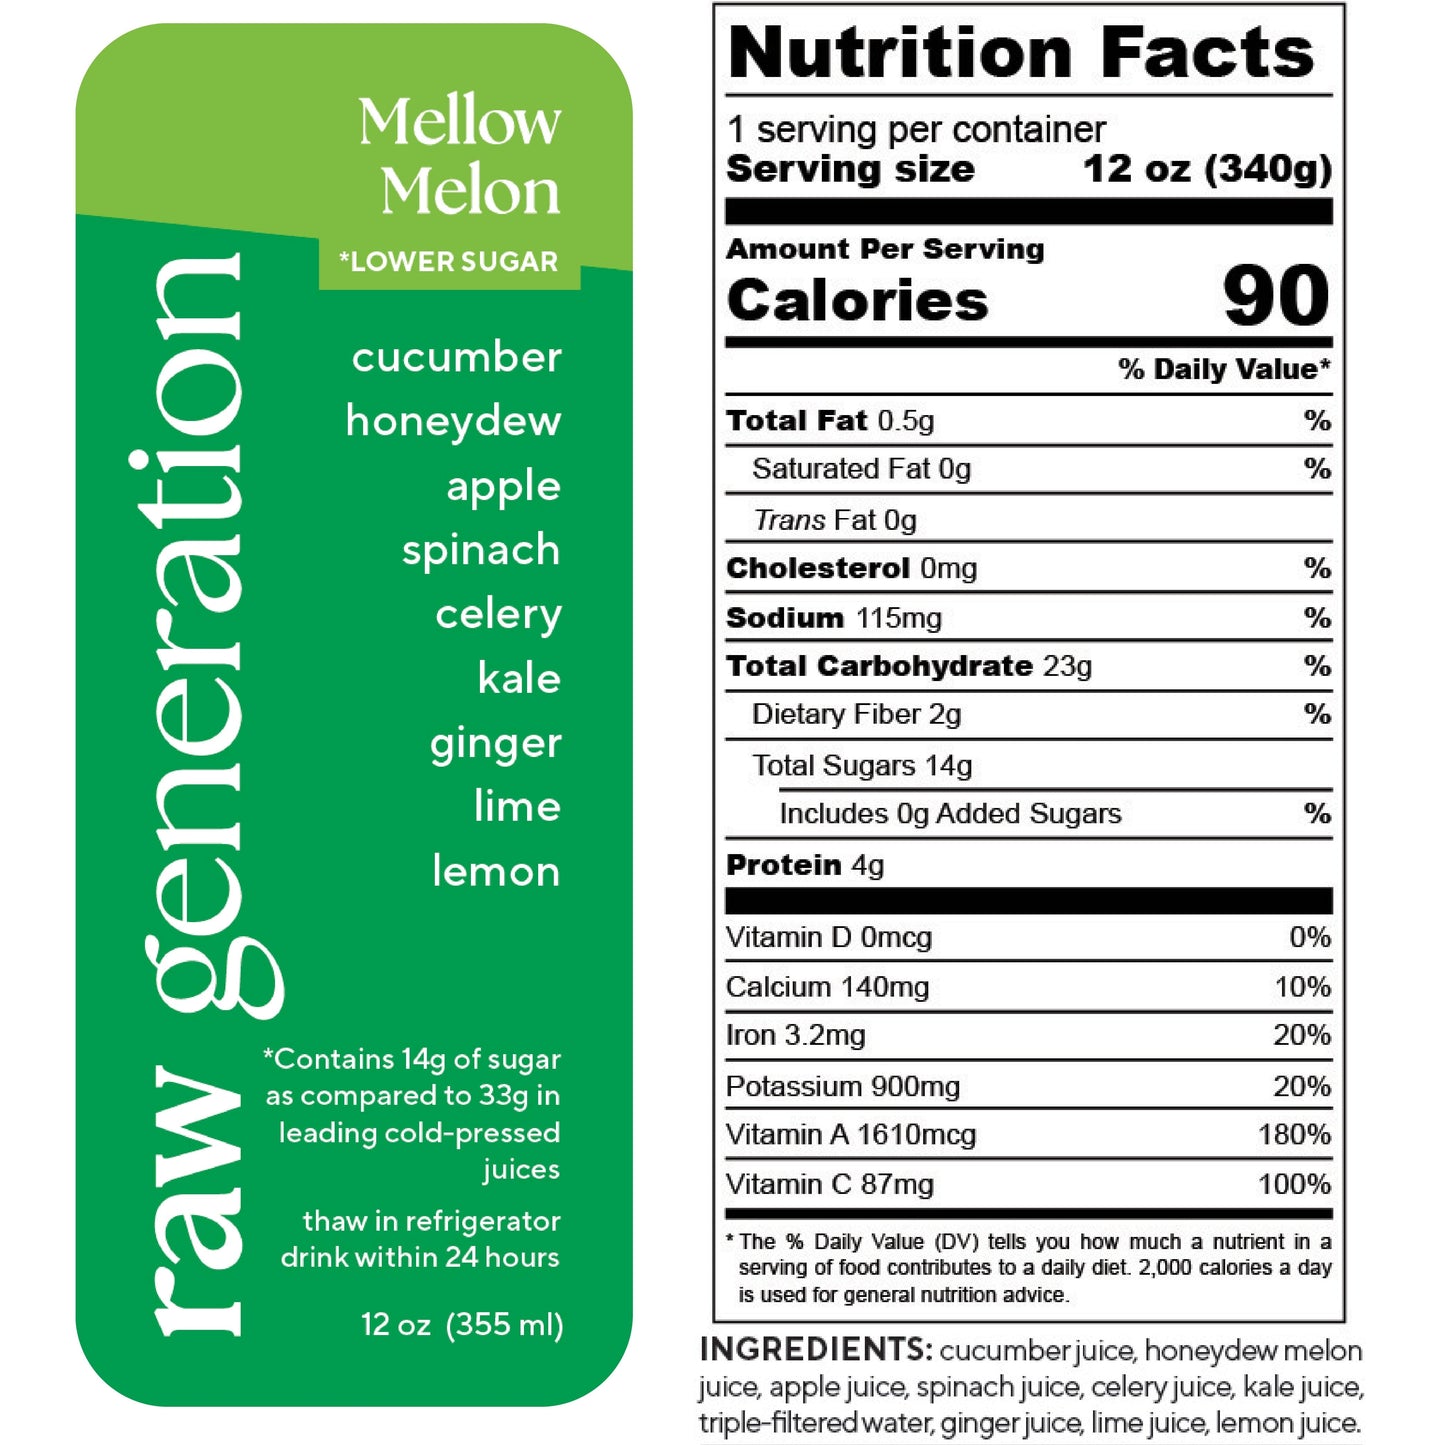 Nutrition Facts, 1 serving/container, 12 oz (340g), Calories 90, Total Fat 0.5g, Saturated Fat 0g, Trans Fat 0g, Cholesterol 0mg, Sodium 115mg, Total Carbohydrate 23g, Dietary Fiber 2g, Total Sugars 14g, Added Sugars 0g, Protein 4g, Vitamin D 0mcg, Calcium 140mg, Iron 3.2mg, Potassium 900mg, Vitamin A 1610mcg, Vitamin C 87mg; Ingredients: melon juice, apple juice, spinach juice, celery juice, kale juice, triple-filtered water, ginger juice, lime juice, lemon juice.